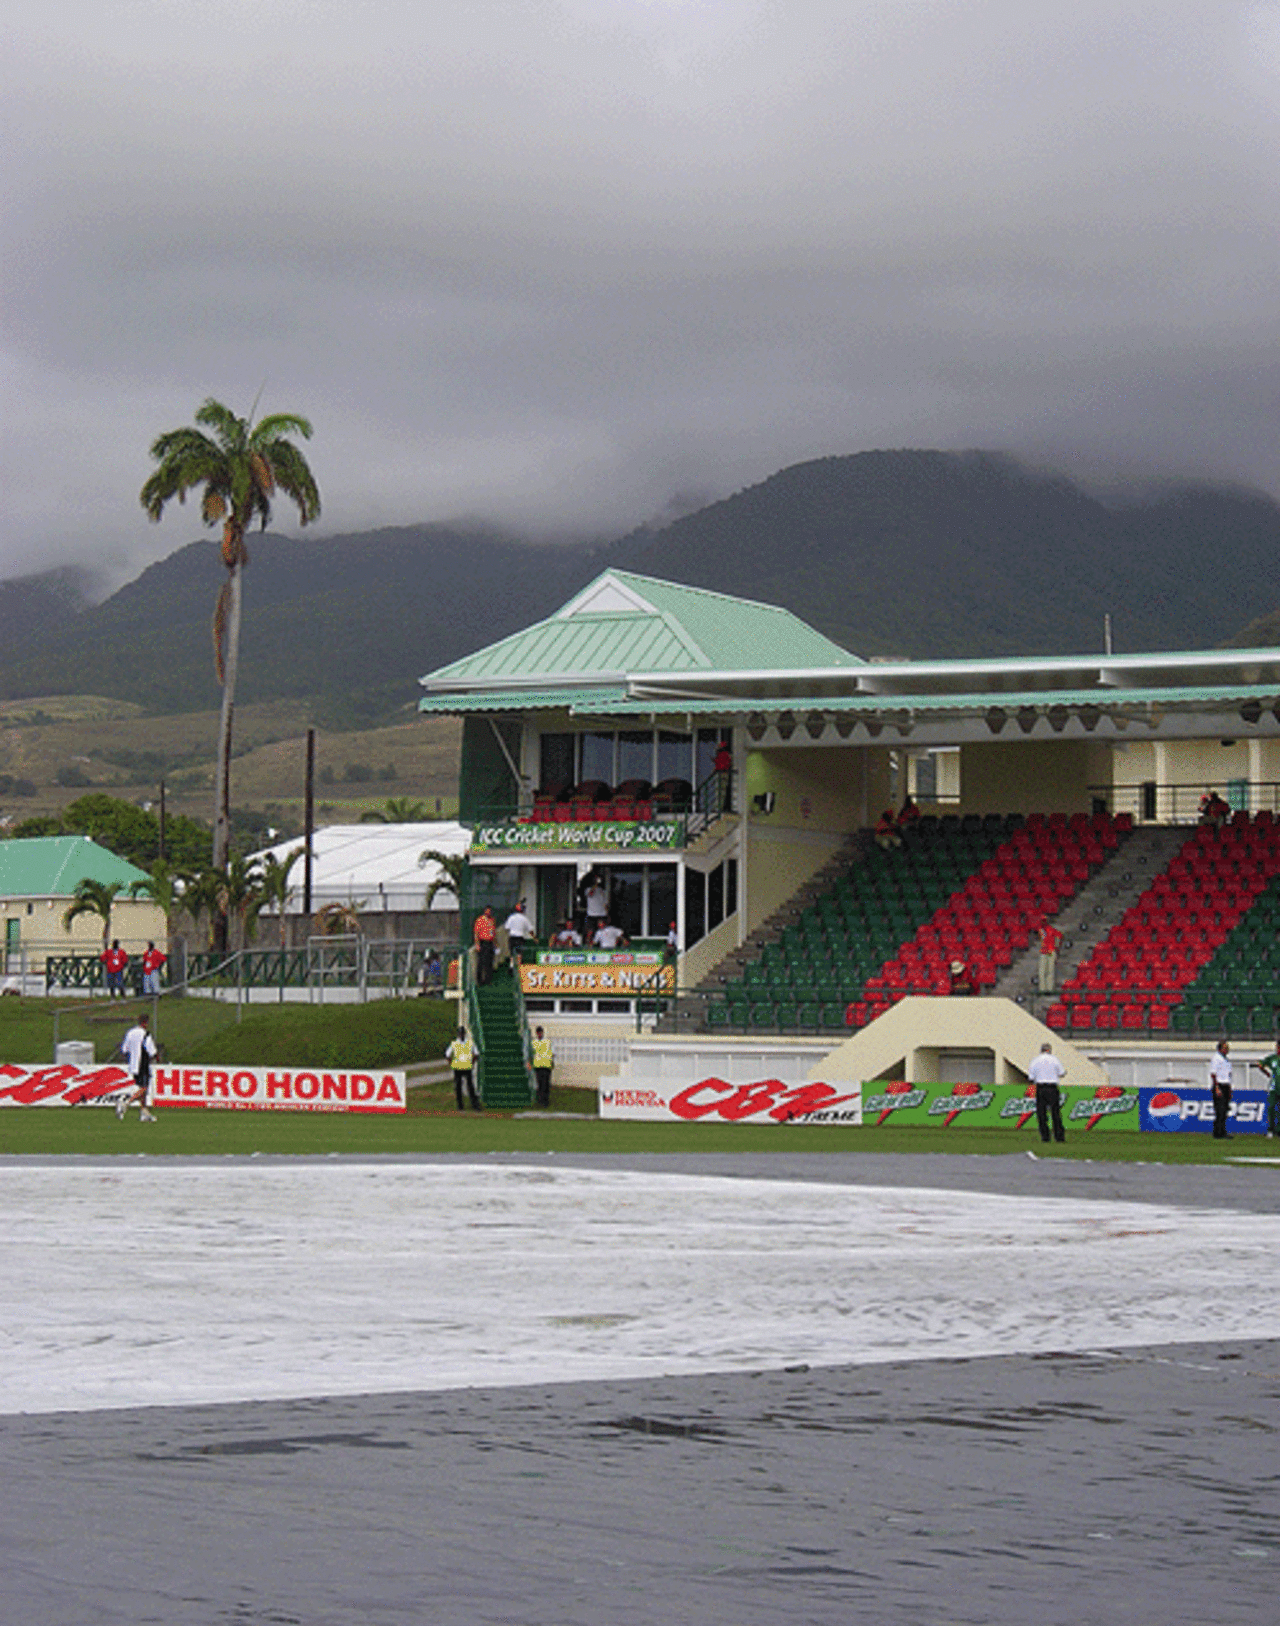 With overnight at Warner Park, St Kitts, the match between Netherlands and South Africa is expected to be delayed by an hour, March 16, 2007